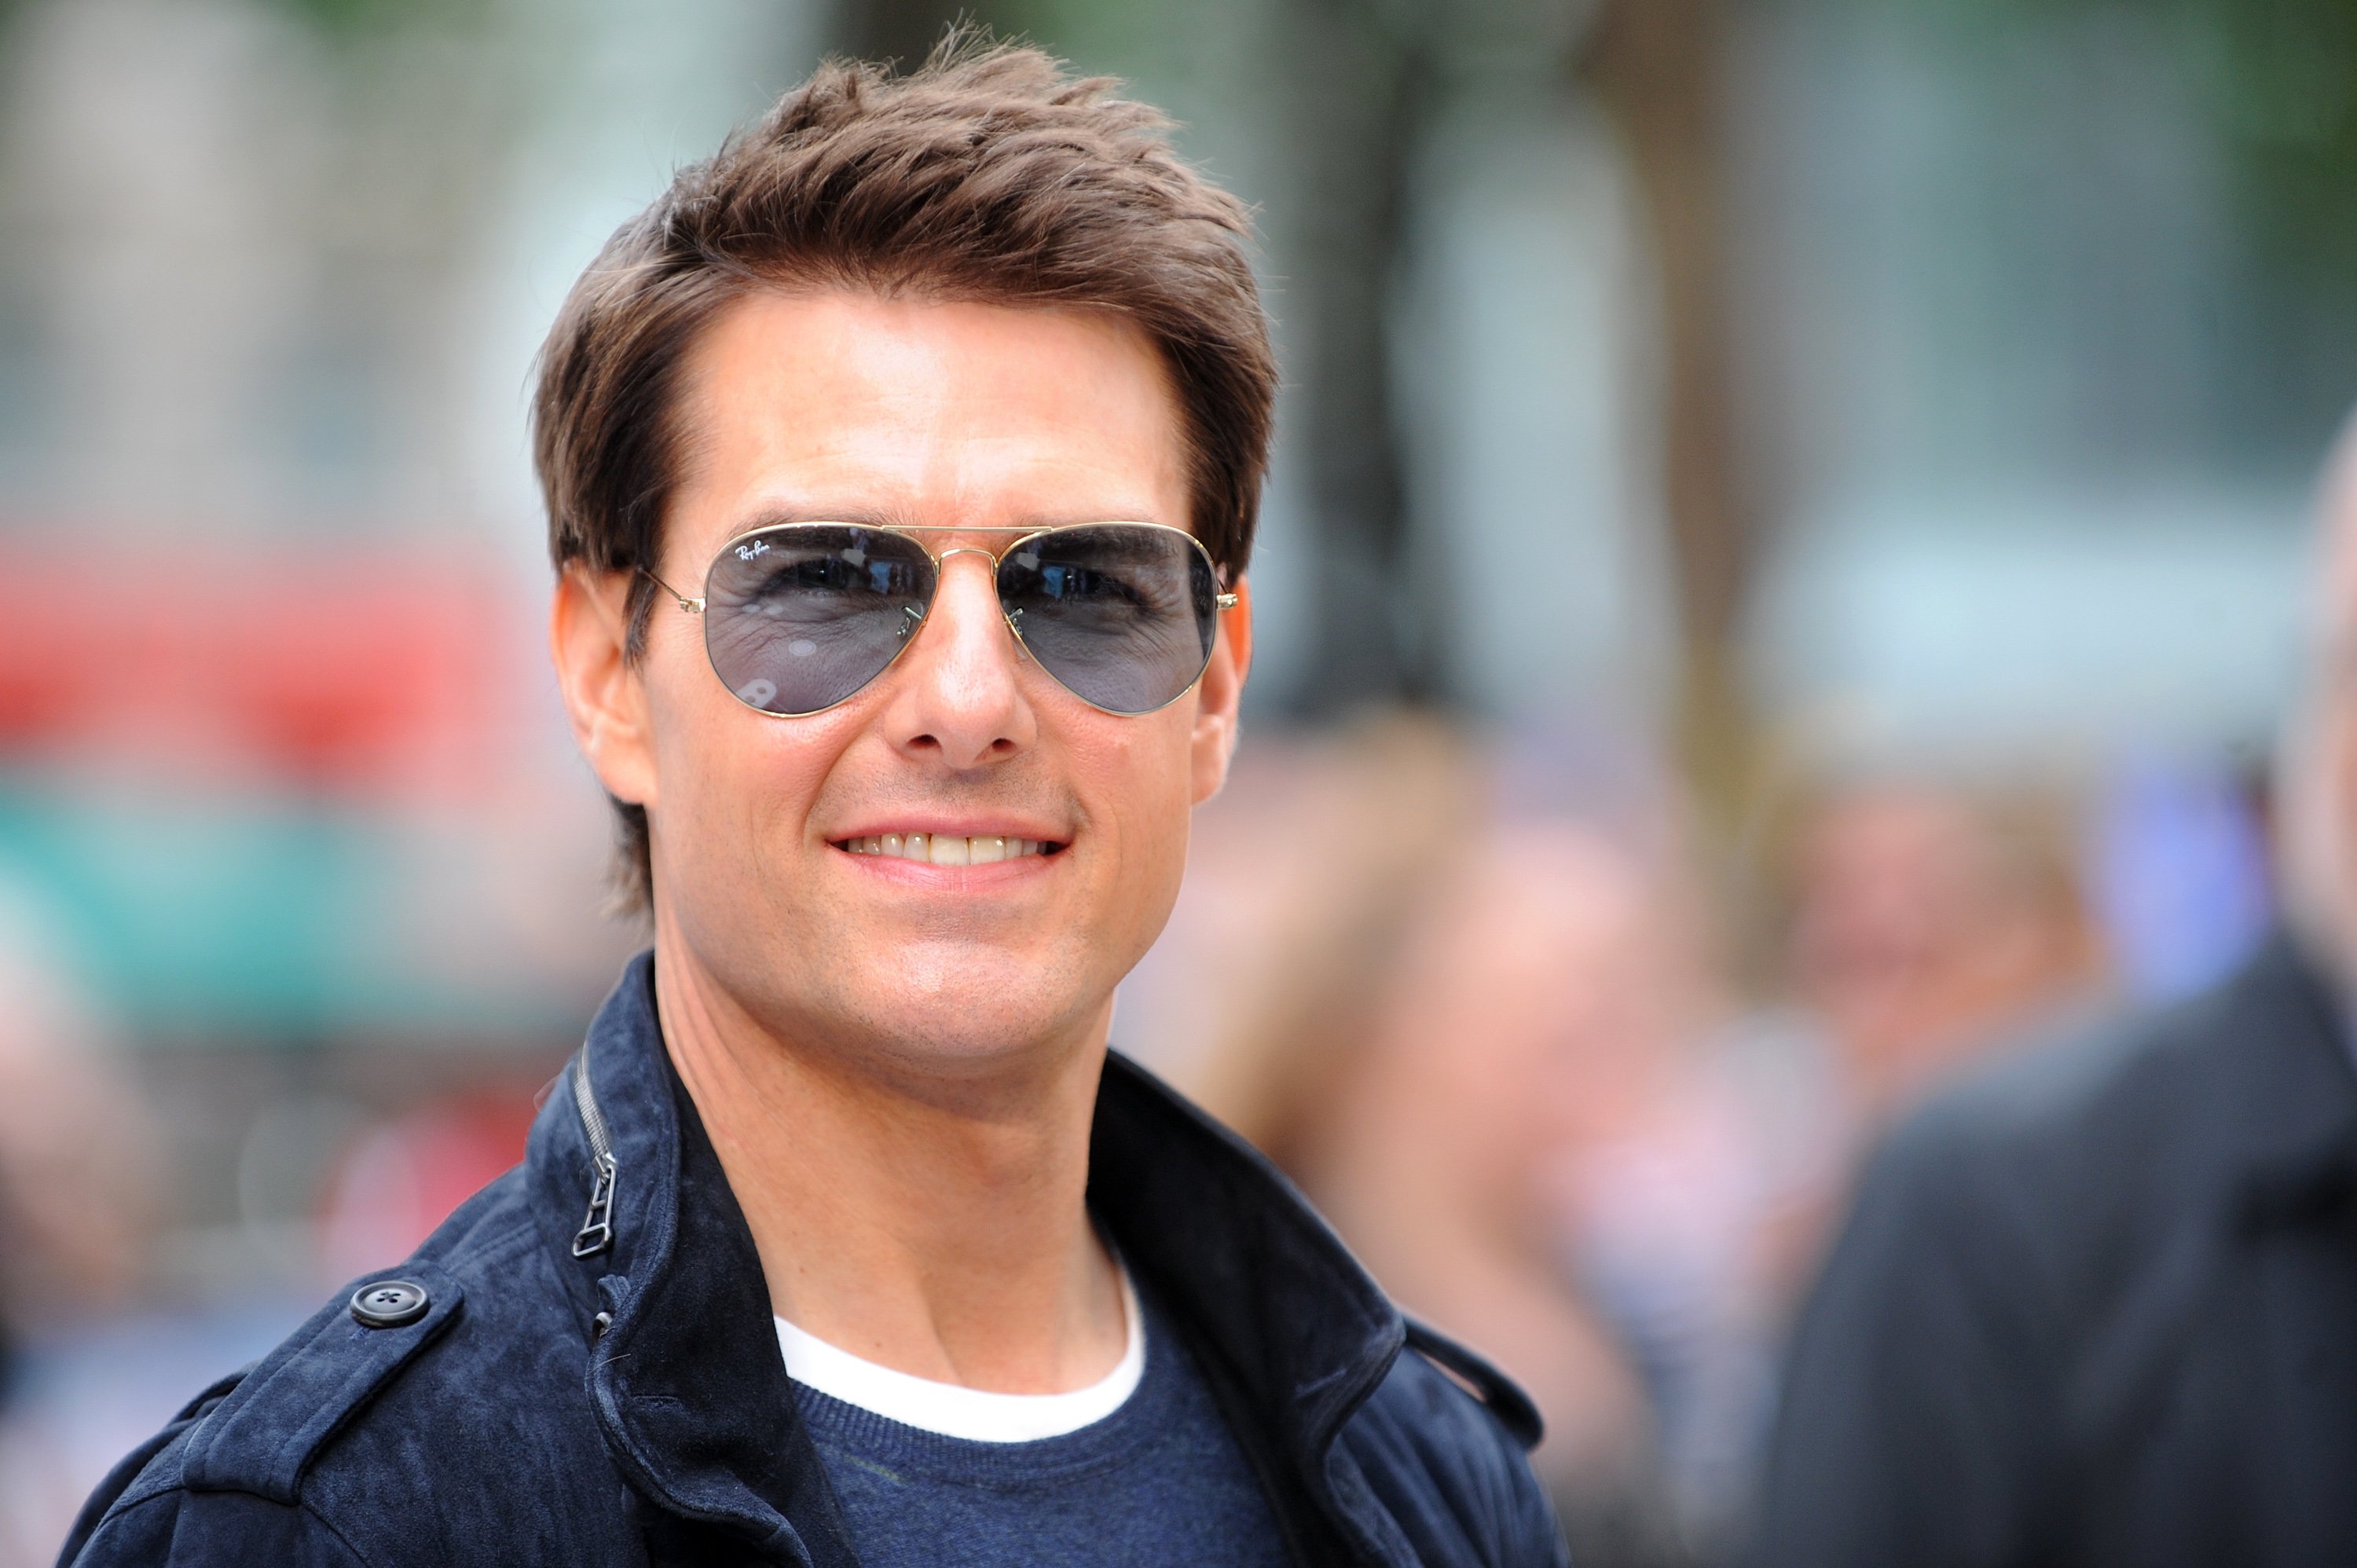 Tom Cruise attends the European premiere of "Rock Of Ages" at Odeon Leicester Square on June 10, 2012 | Photo: Getty Images